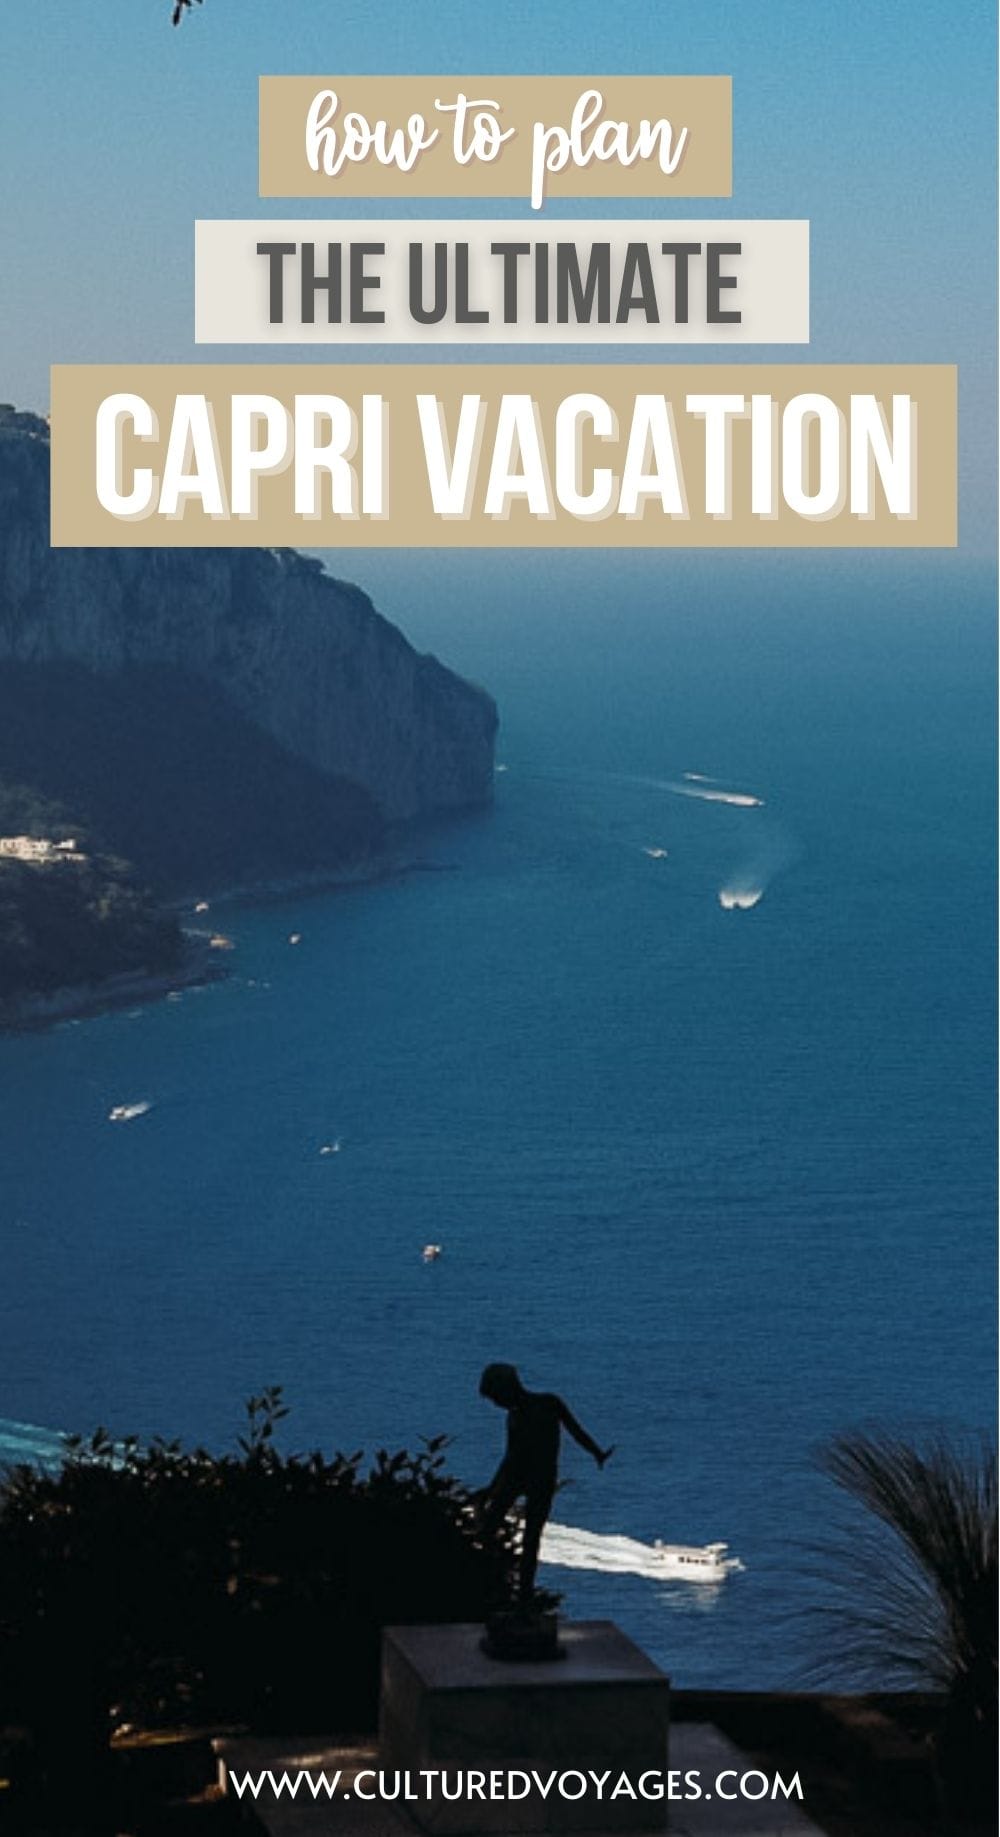 capri vacation guide pin cover, with image of statue of boy in shadow on top of cliff in capri, looking down at boats on the water far below